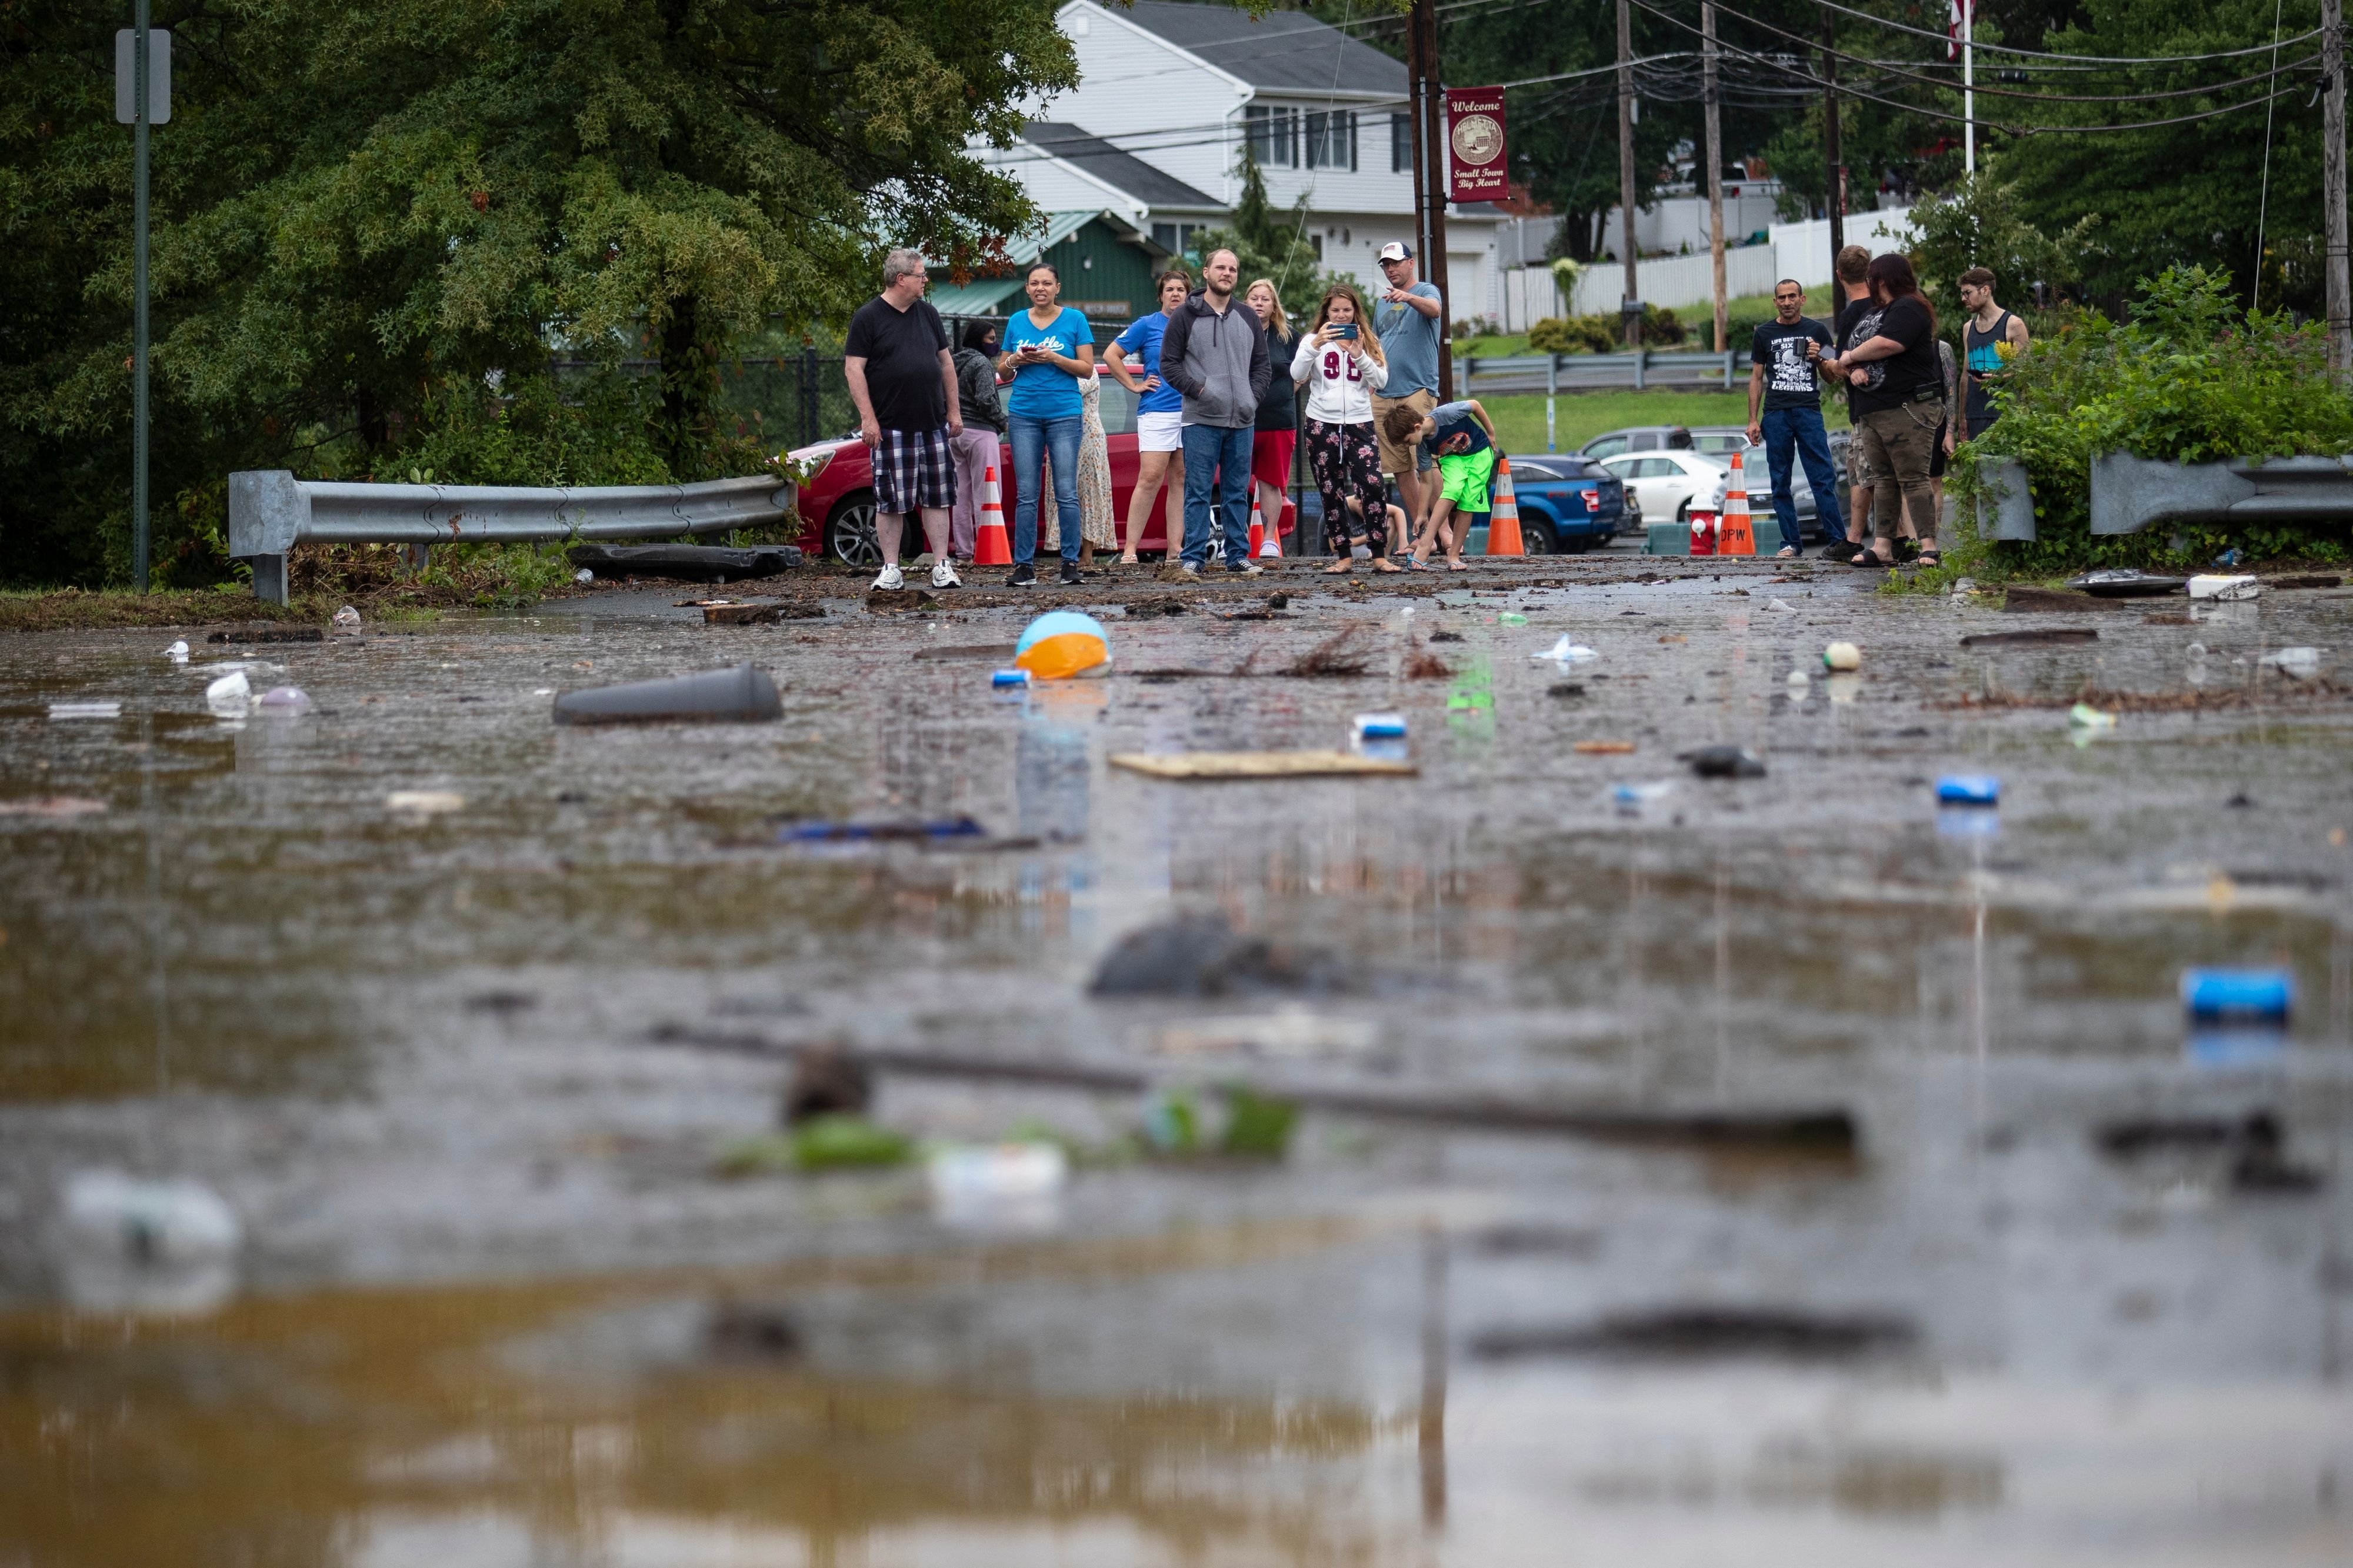 Evacuated residents look towards floating debris following a flash flood from Tropical Storm Henri